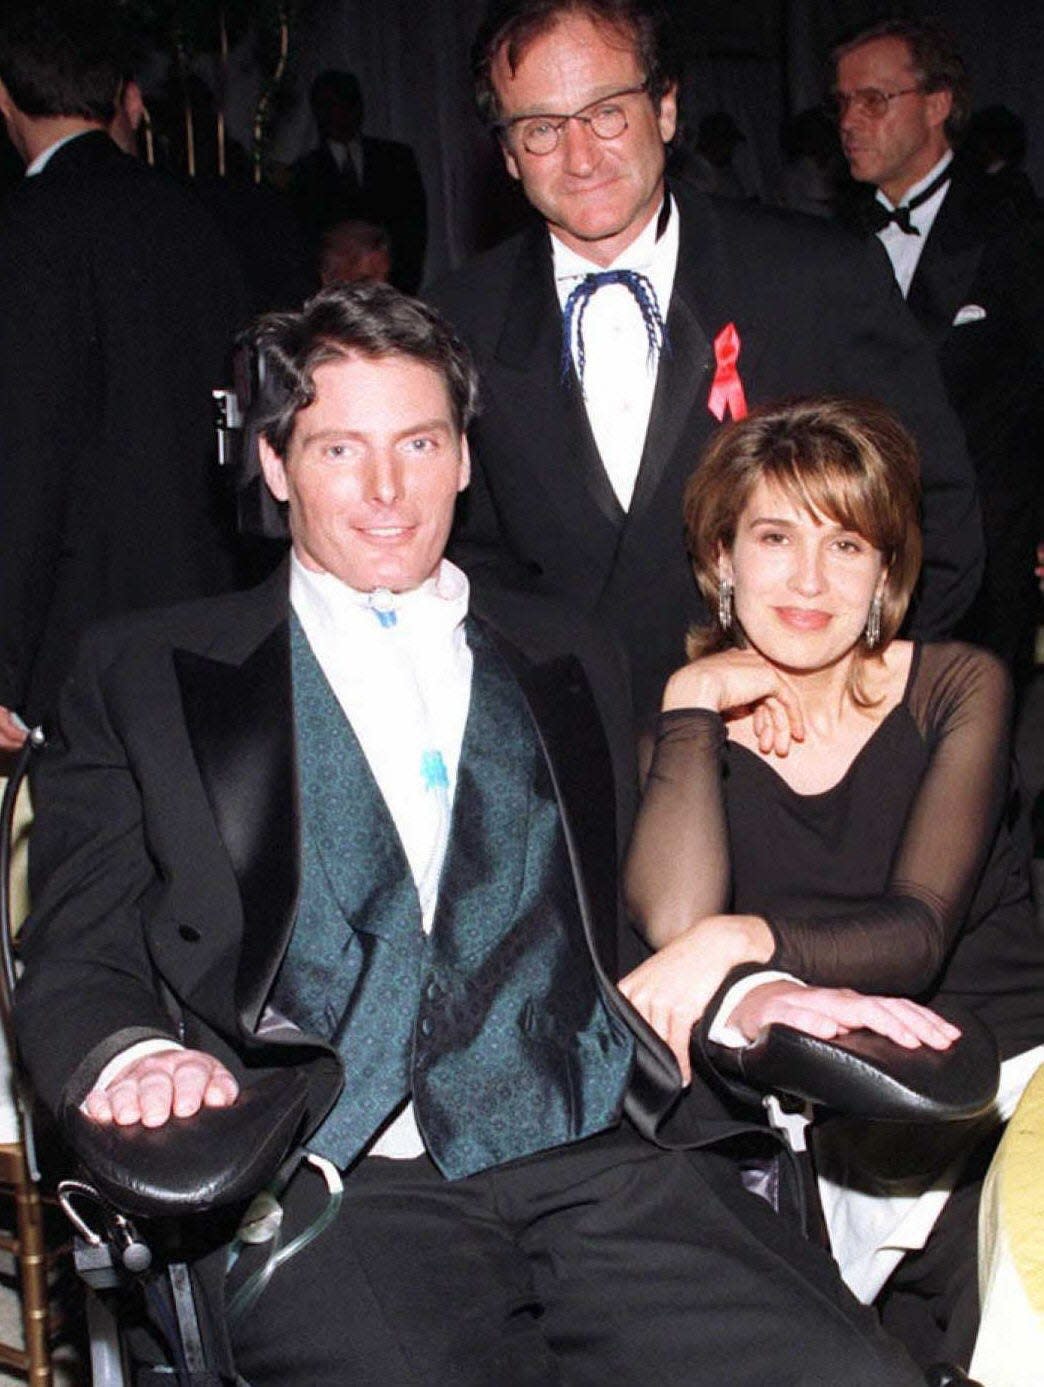 Christopher Reeve (L), wife Dana (R) and Robin Williams (C) pose while at the Governor's Ball after the 68th Annual Academy Awards 25 March in Los Angeles. Reeve made his first appearance before the Hollywood community after an equestrian accident left him paralyzed a year ago.